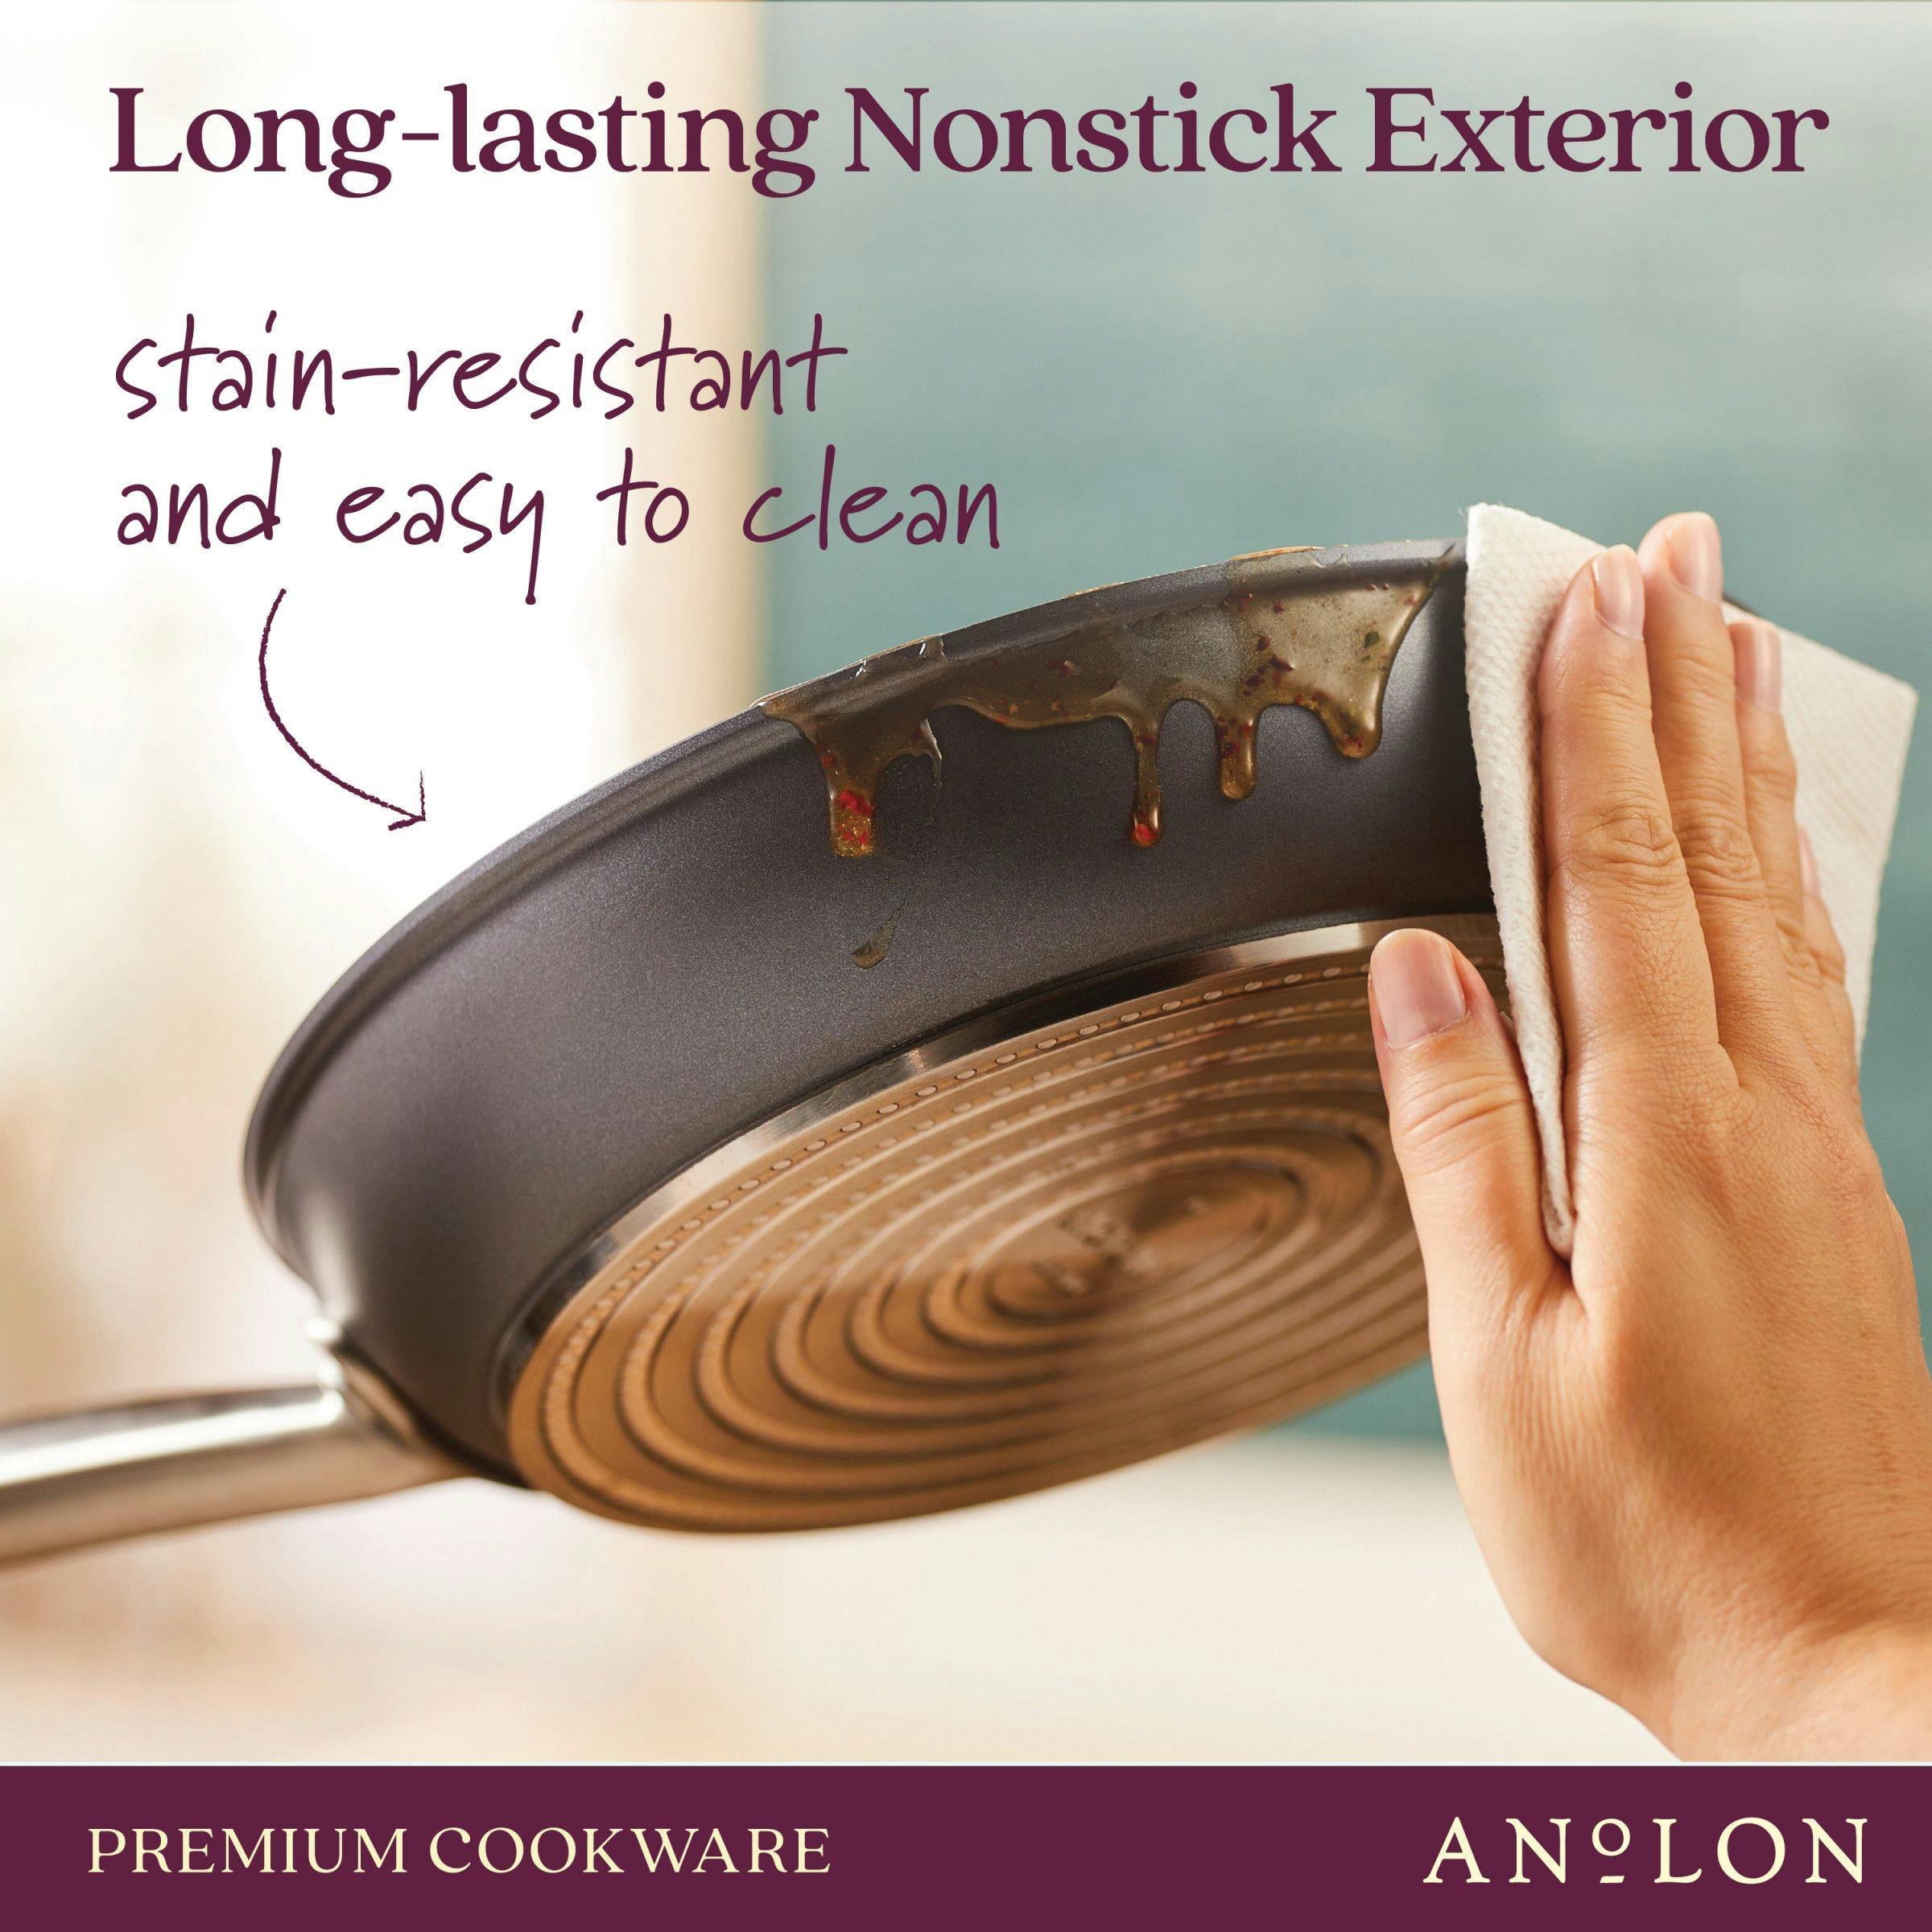 Anolon Accolade Forged Hard-Anodized Nonstick Induction Frying Pan Set, 2-Piece, Moonstone